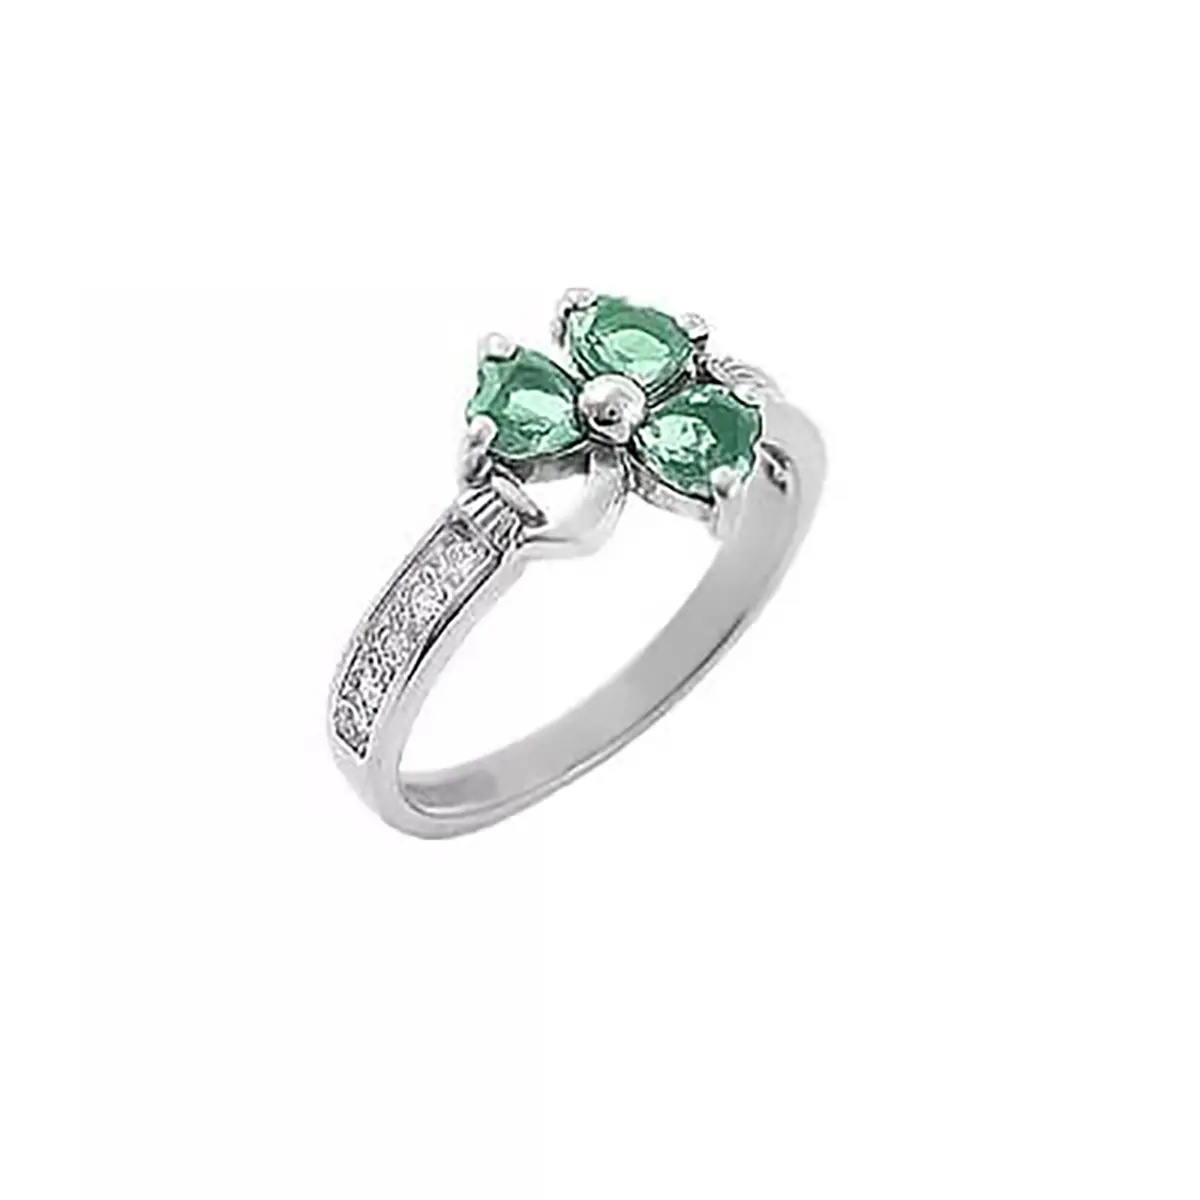 1_claddagh_ring_emerald_white_gold